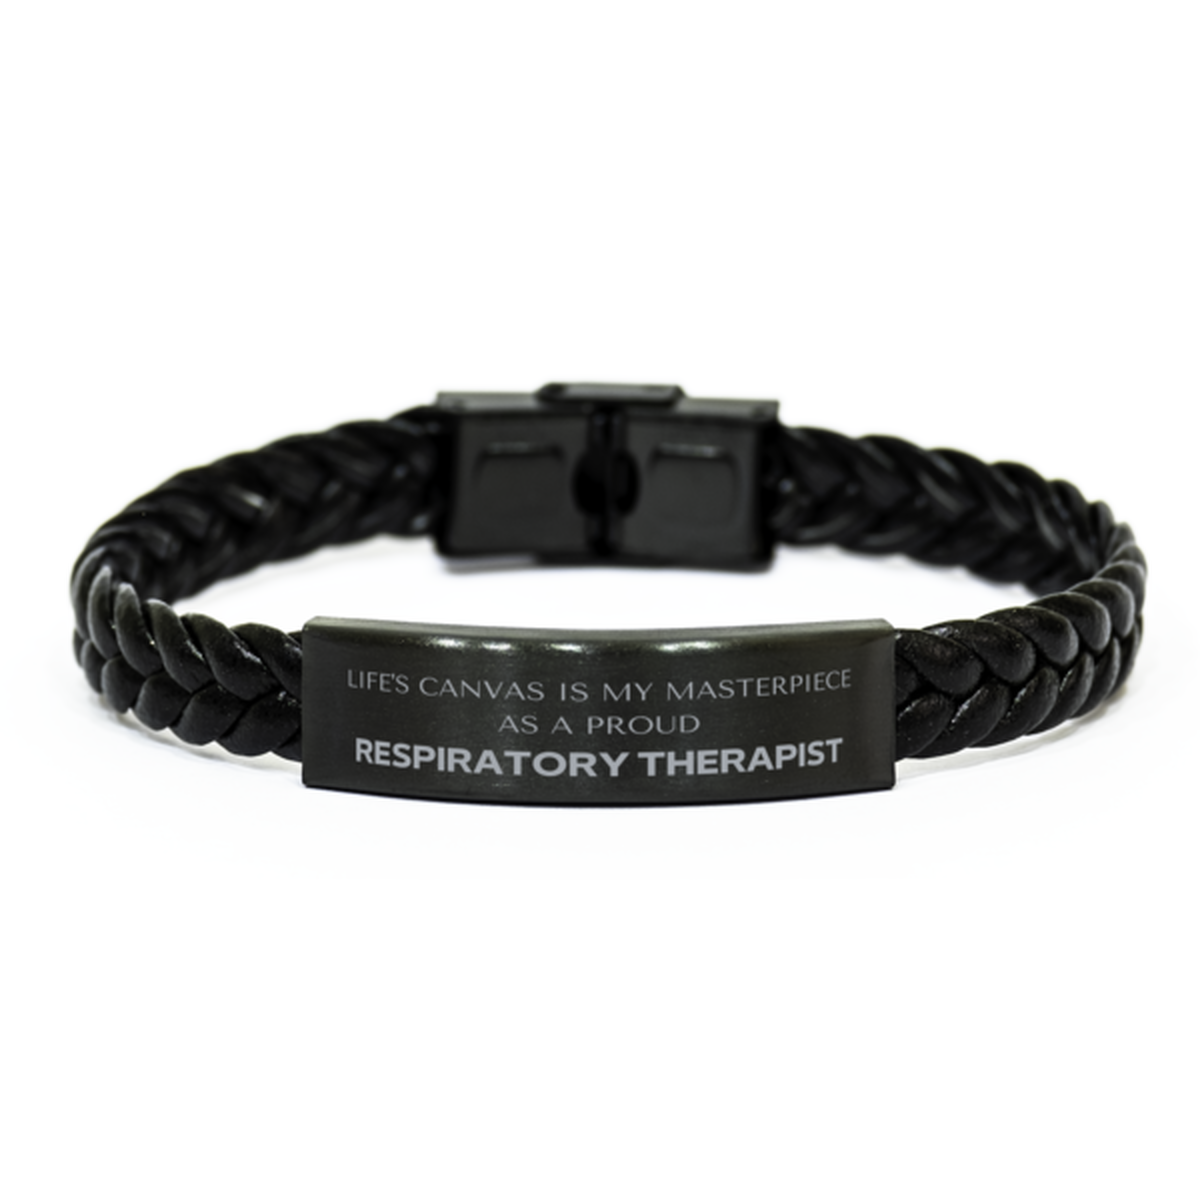 Proud Respiratory Therapist Gifts, Life's canvas is my masterpiece, Epic Birthday Christmas Unique Braided Leather Bracelet For Respiratory Therapist, Coworkers, Men, Women, Friends